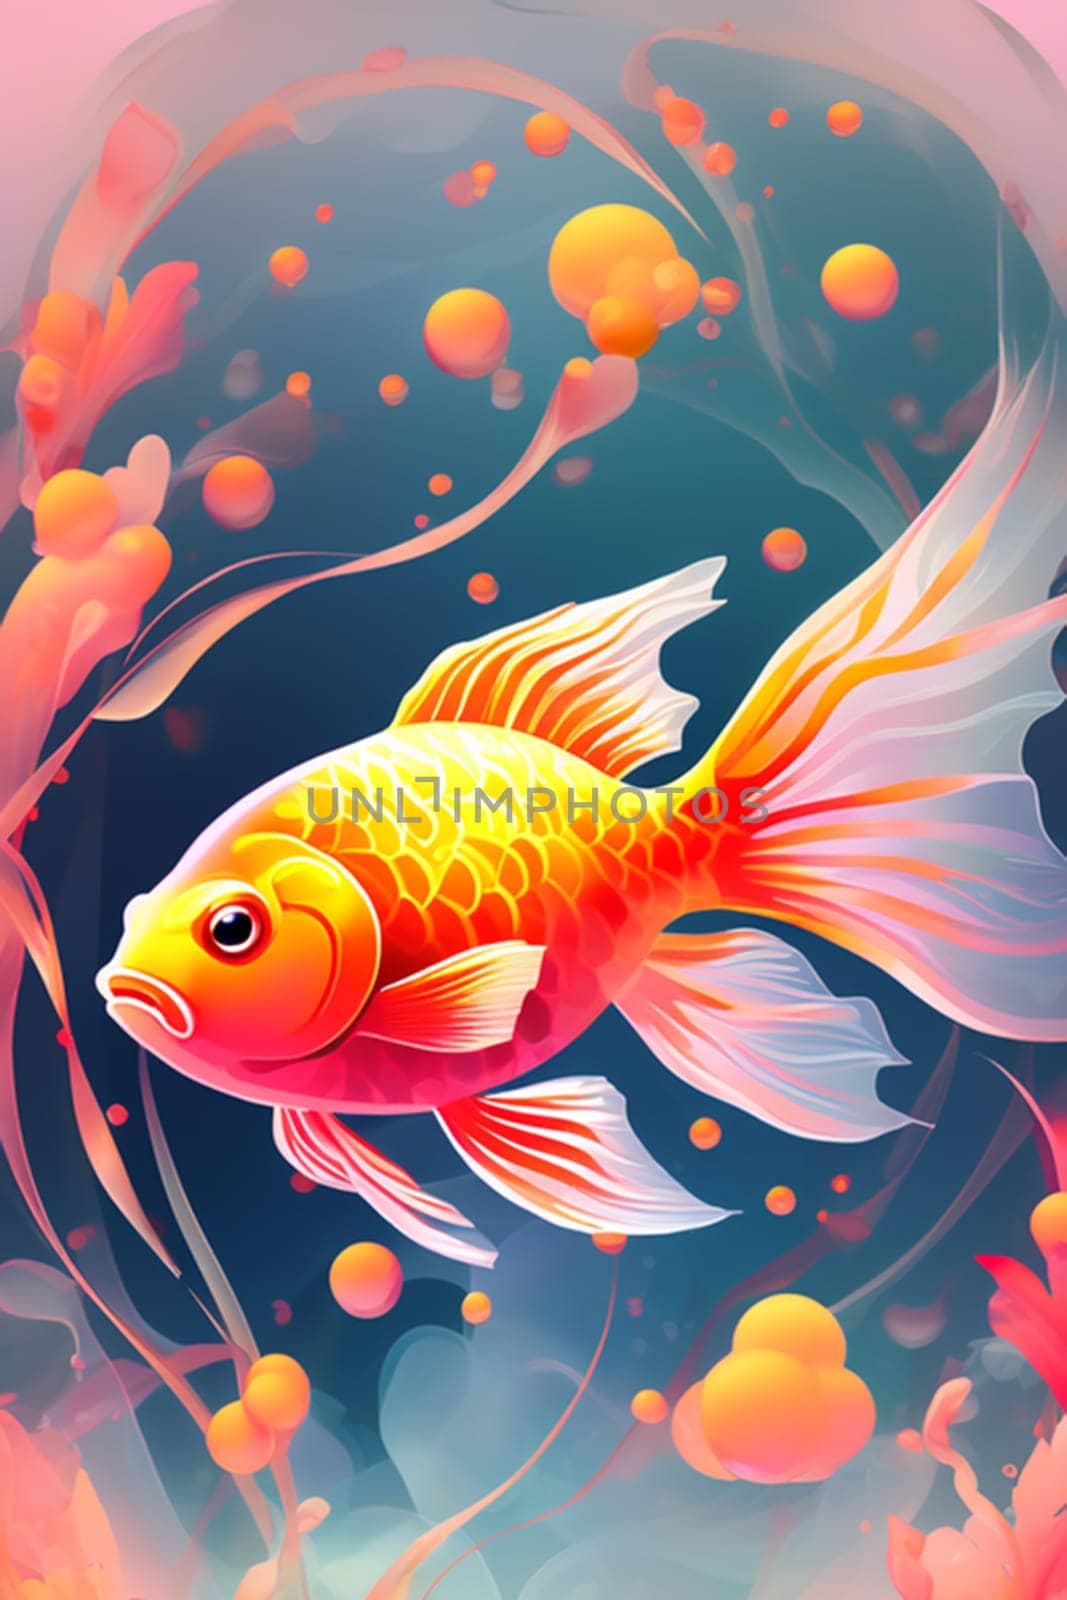 Goldfish in neon color in pop art style. Minimalist style, neon line logo, depicting a mosaic fish surrounded by vibrant smoke effects